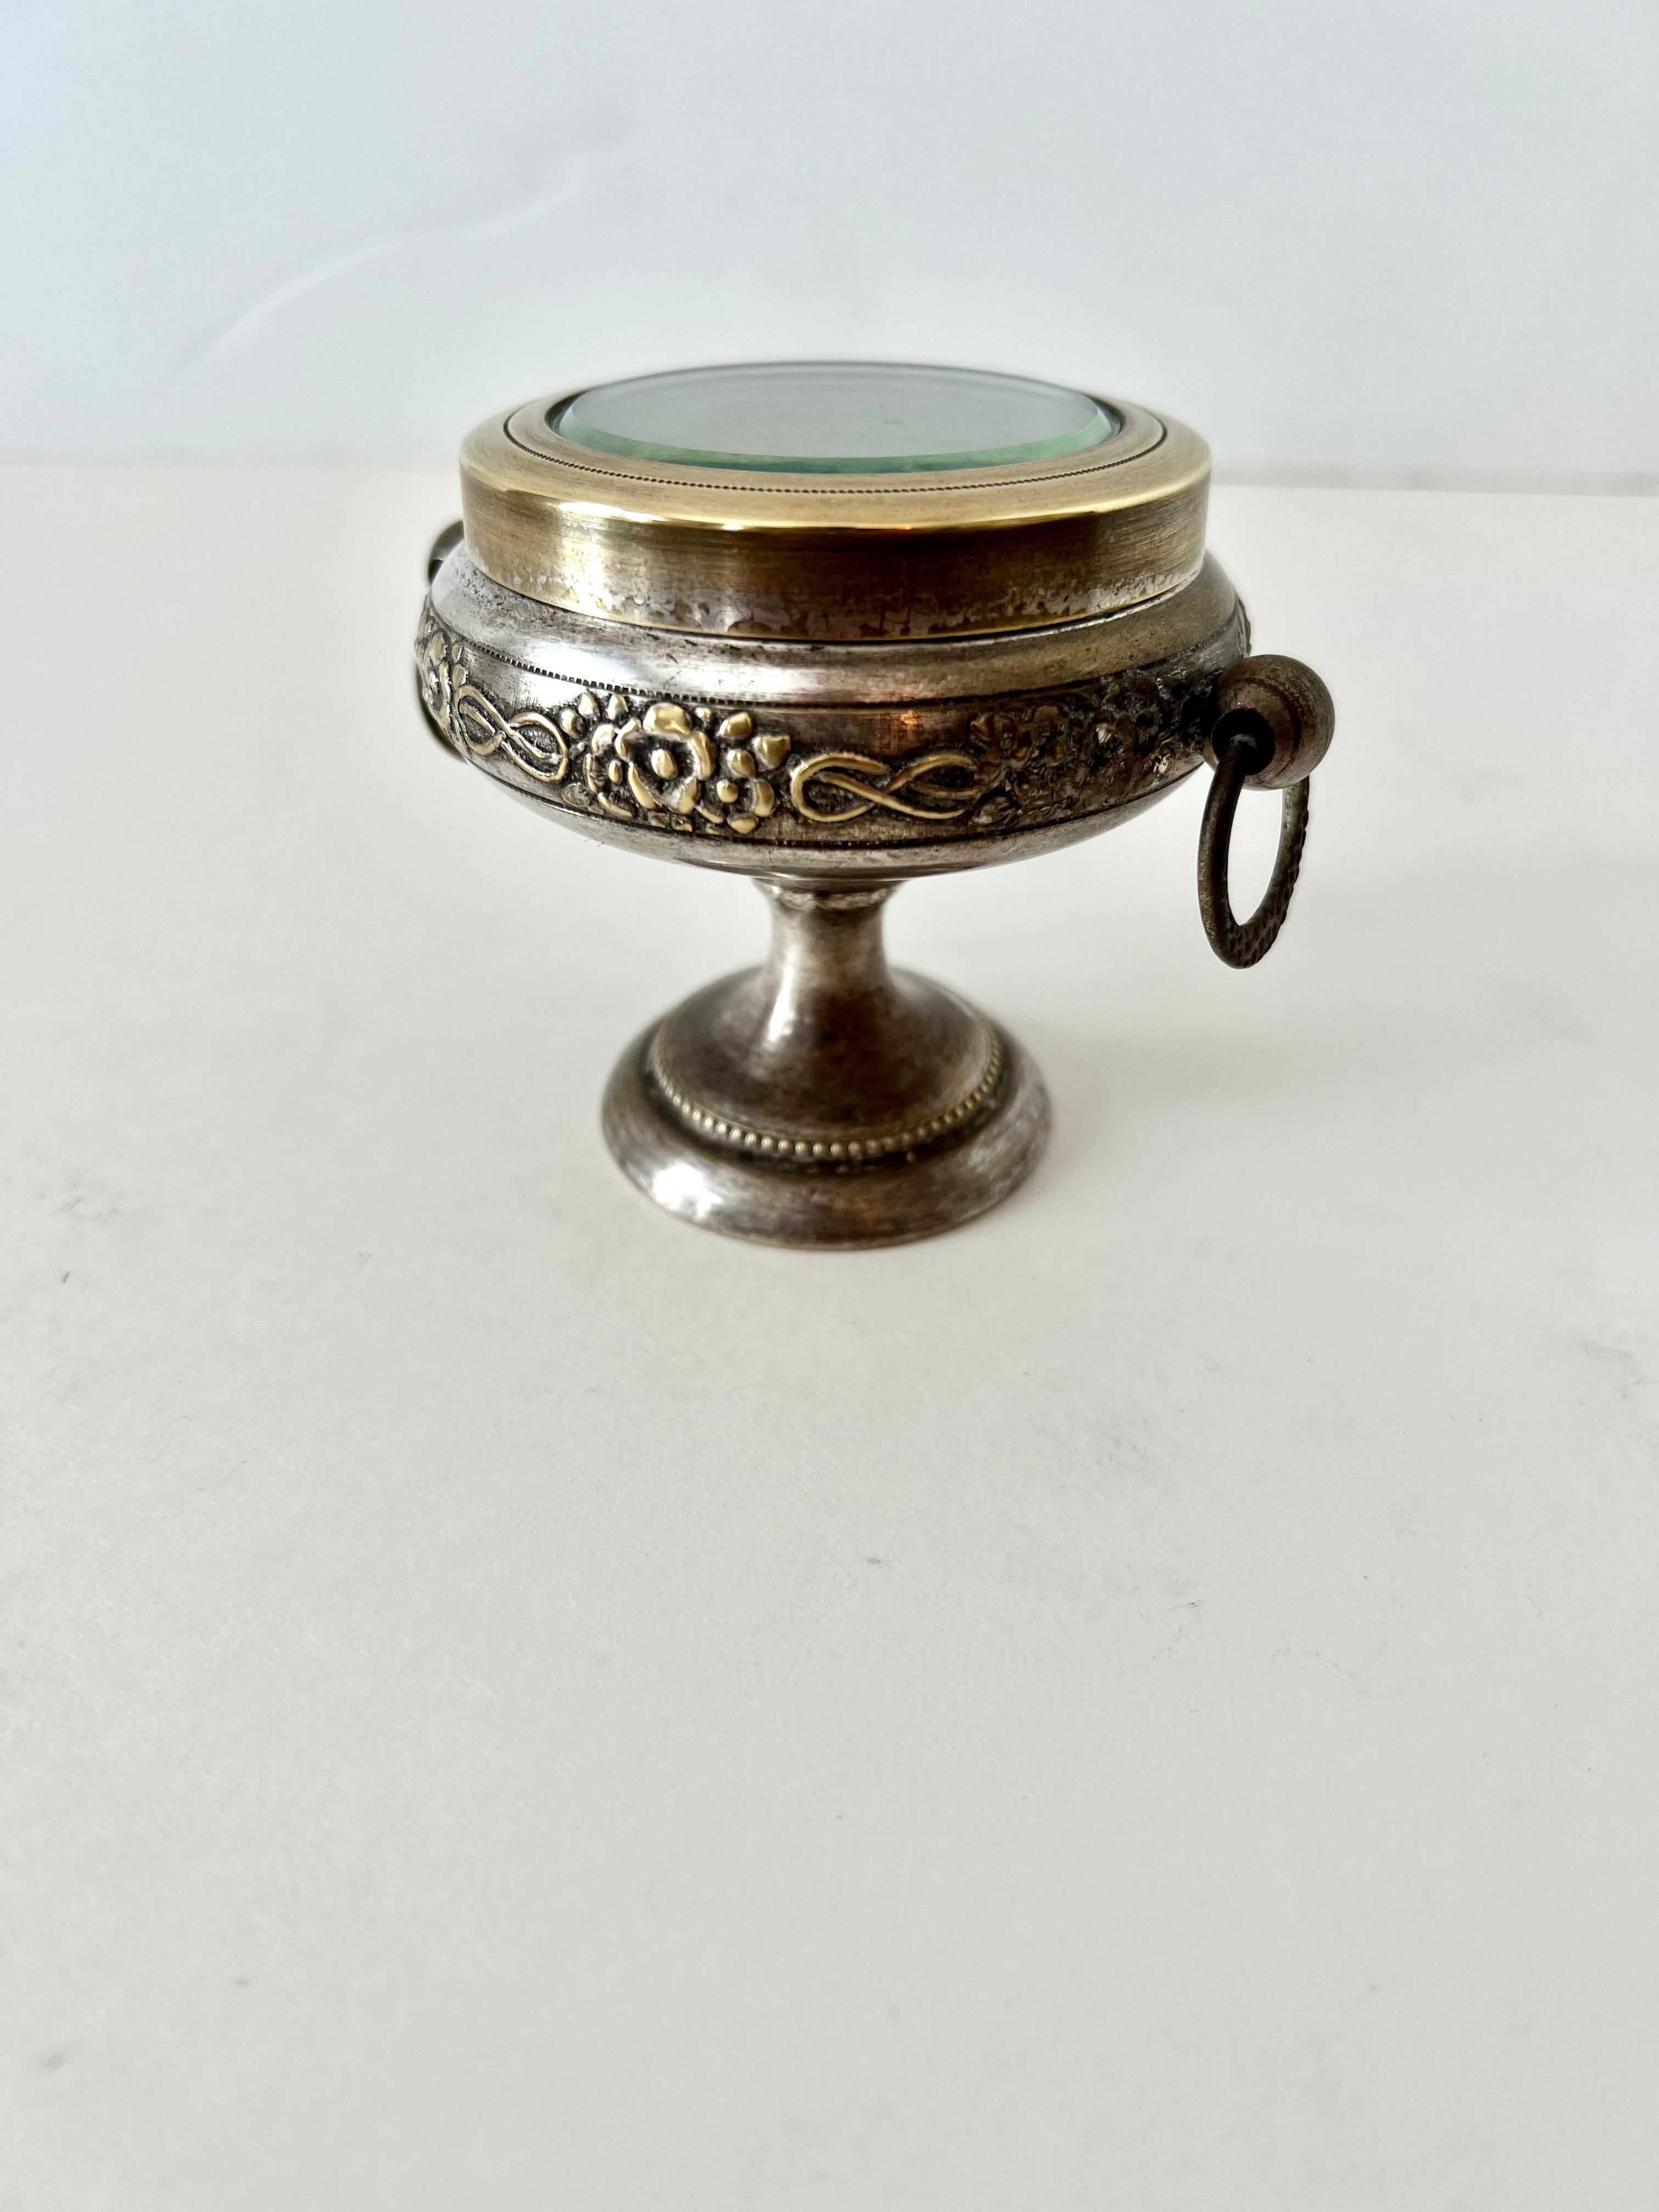 A very nice small pedestaled box with glass lid.  Also termed a casket - the piece is a compliment in many settings - a great way to save herbs, and display them, especially 420!

A nice addition to any desk or work station, night stand piece to